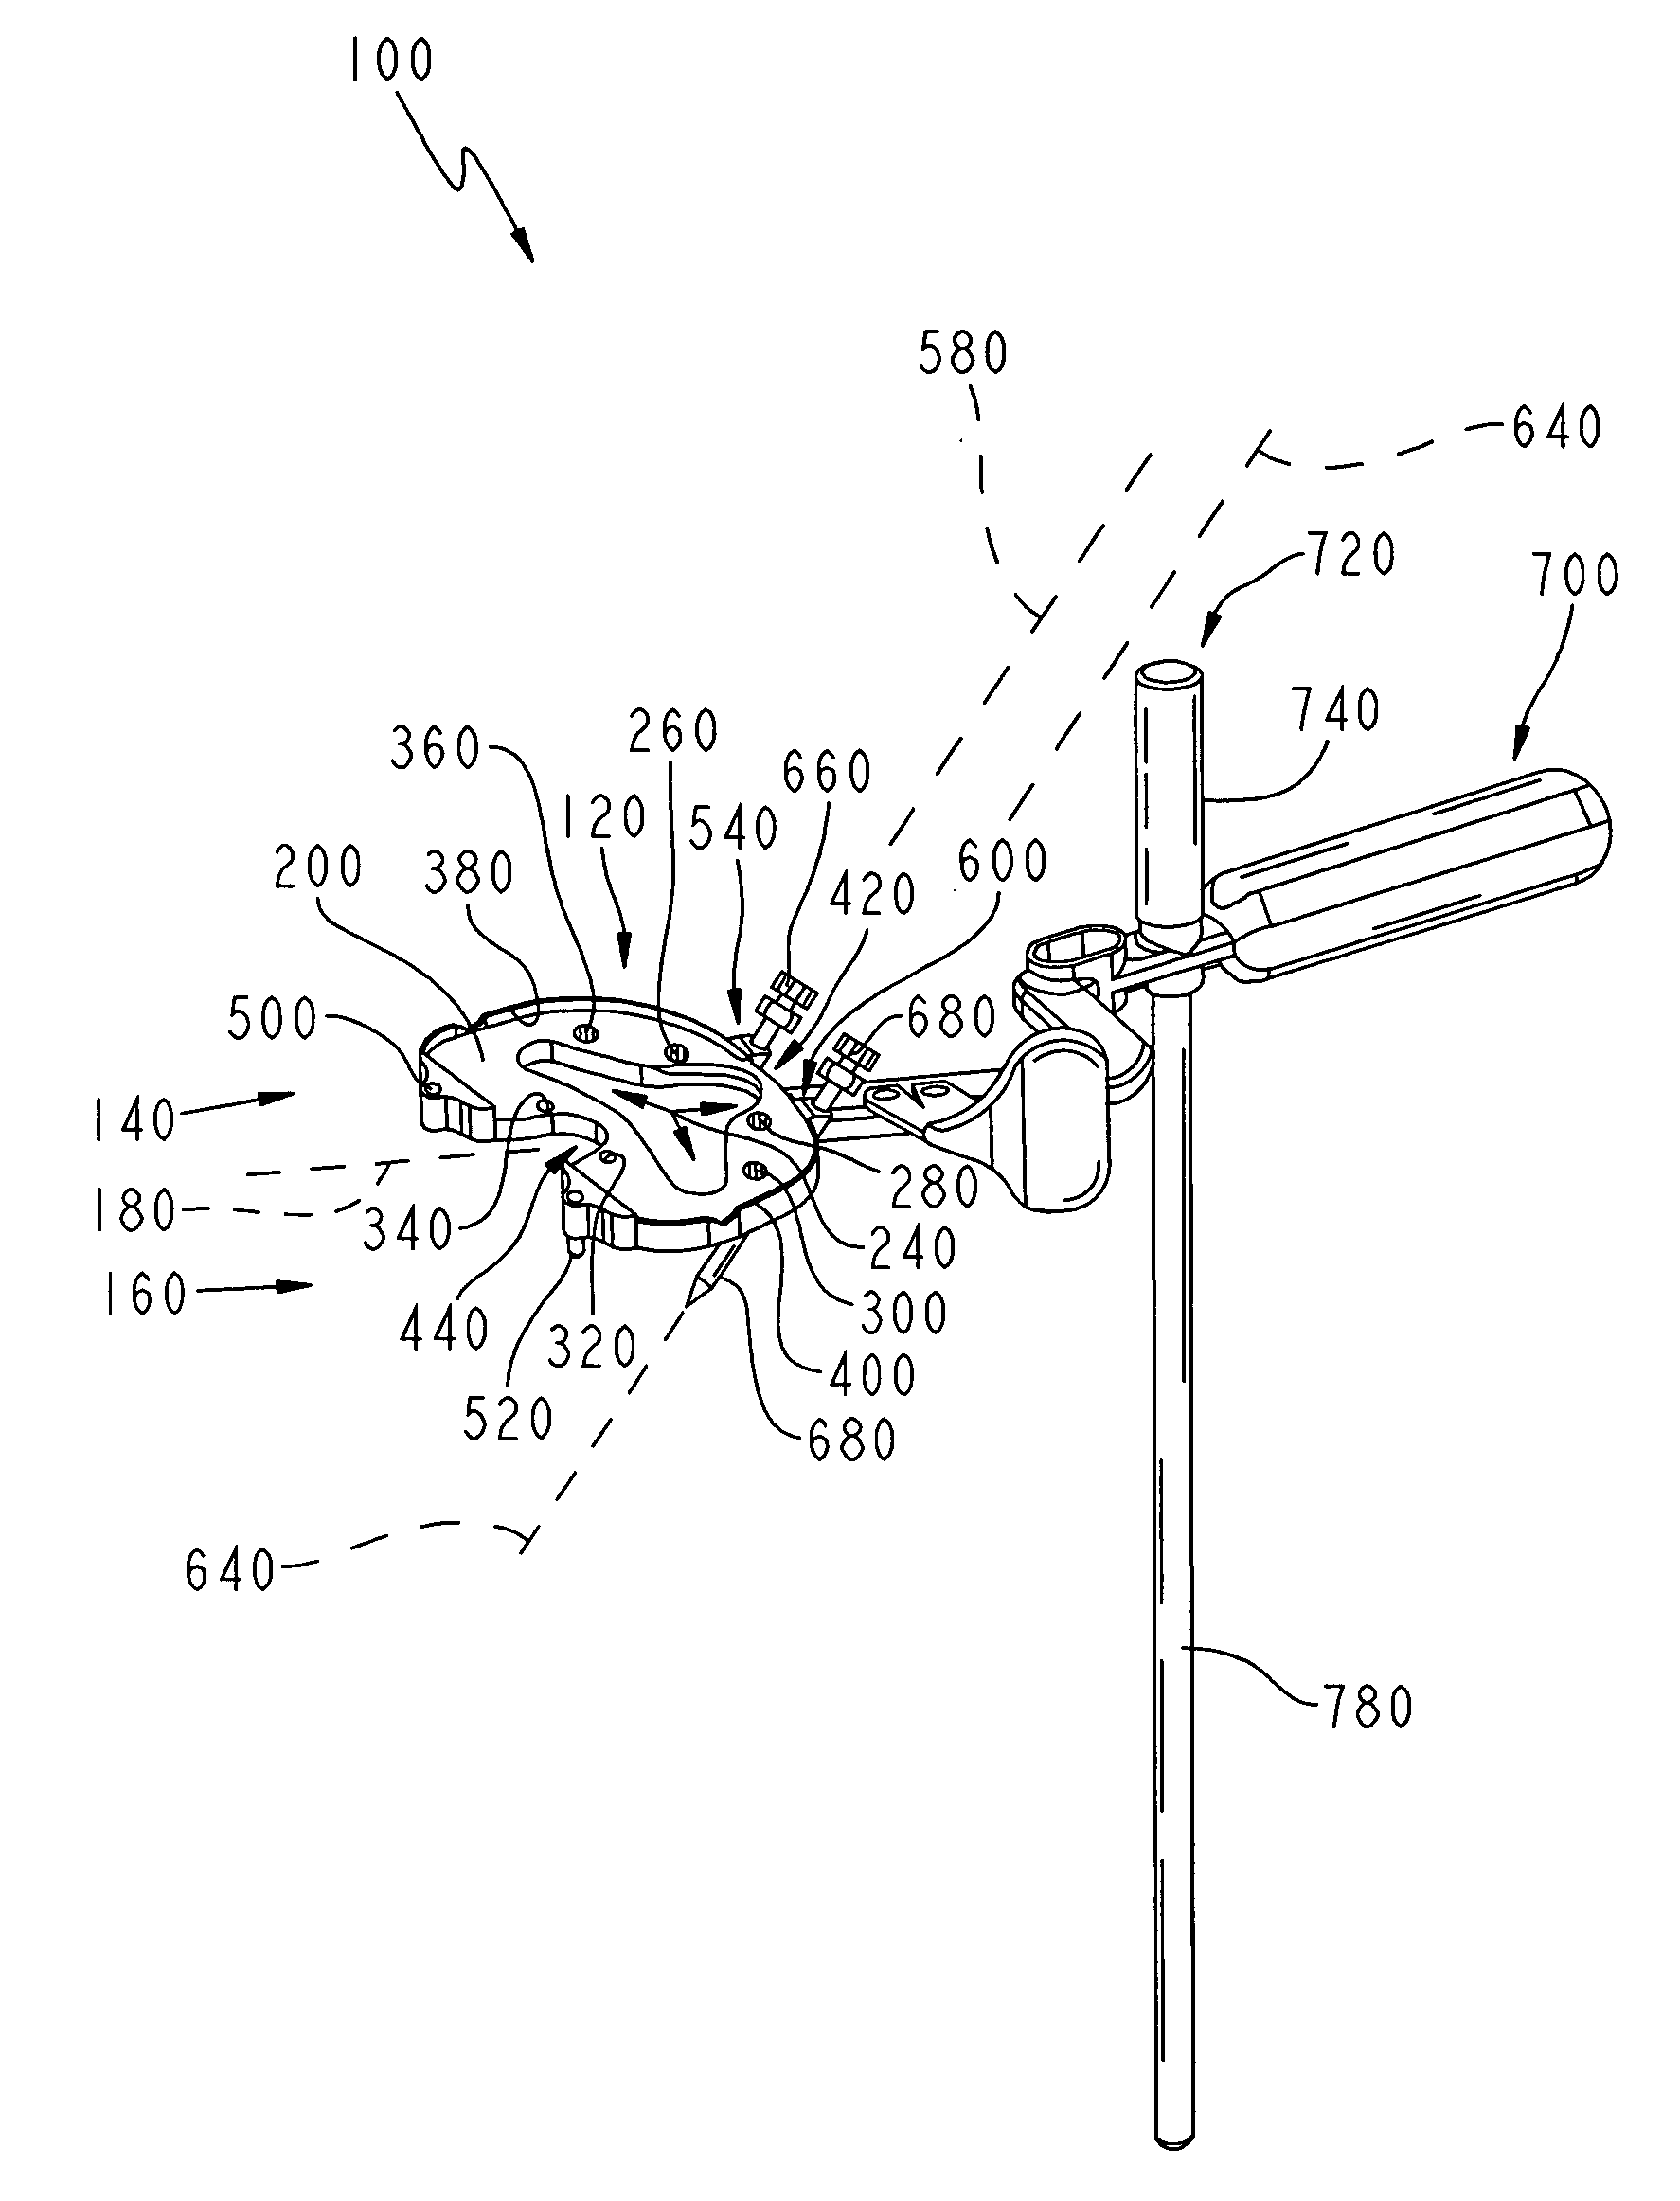 Tibial sizing apparatus and method